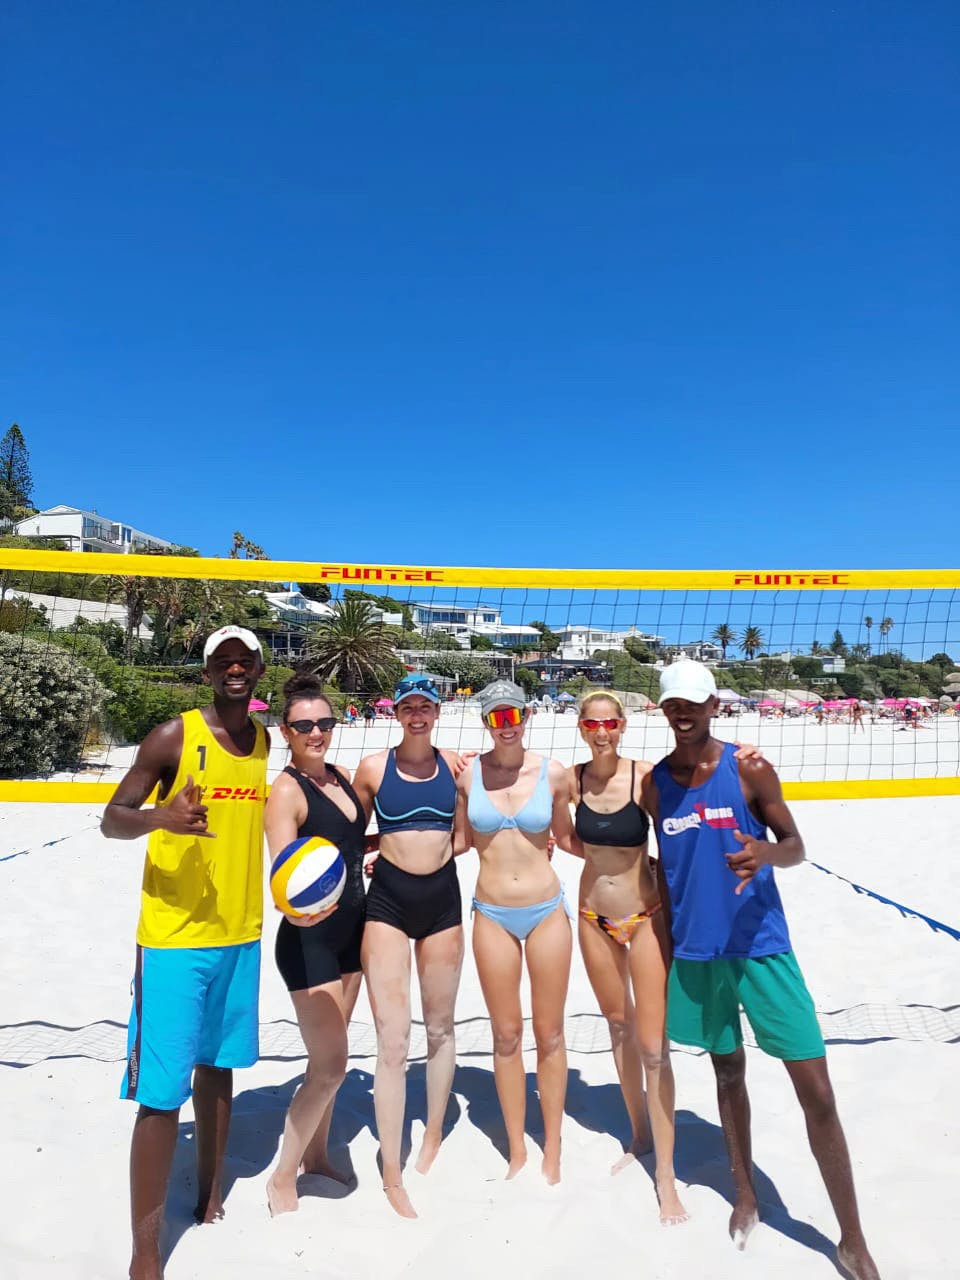 Playing volleyball in Cape Town. Courtesy of Alyssa Rinelli